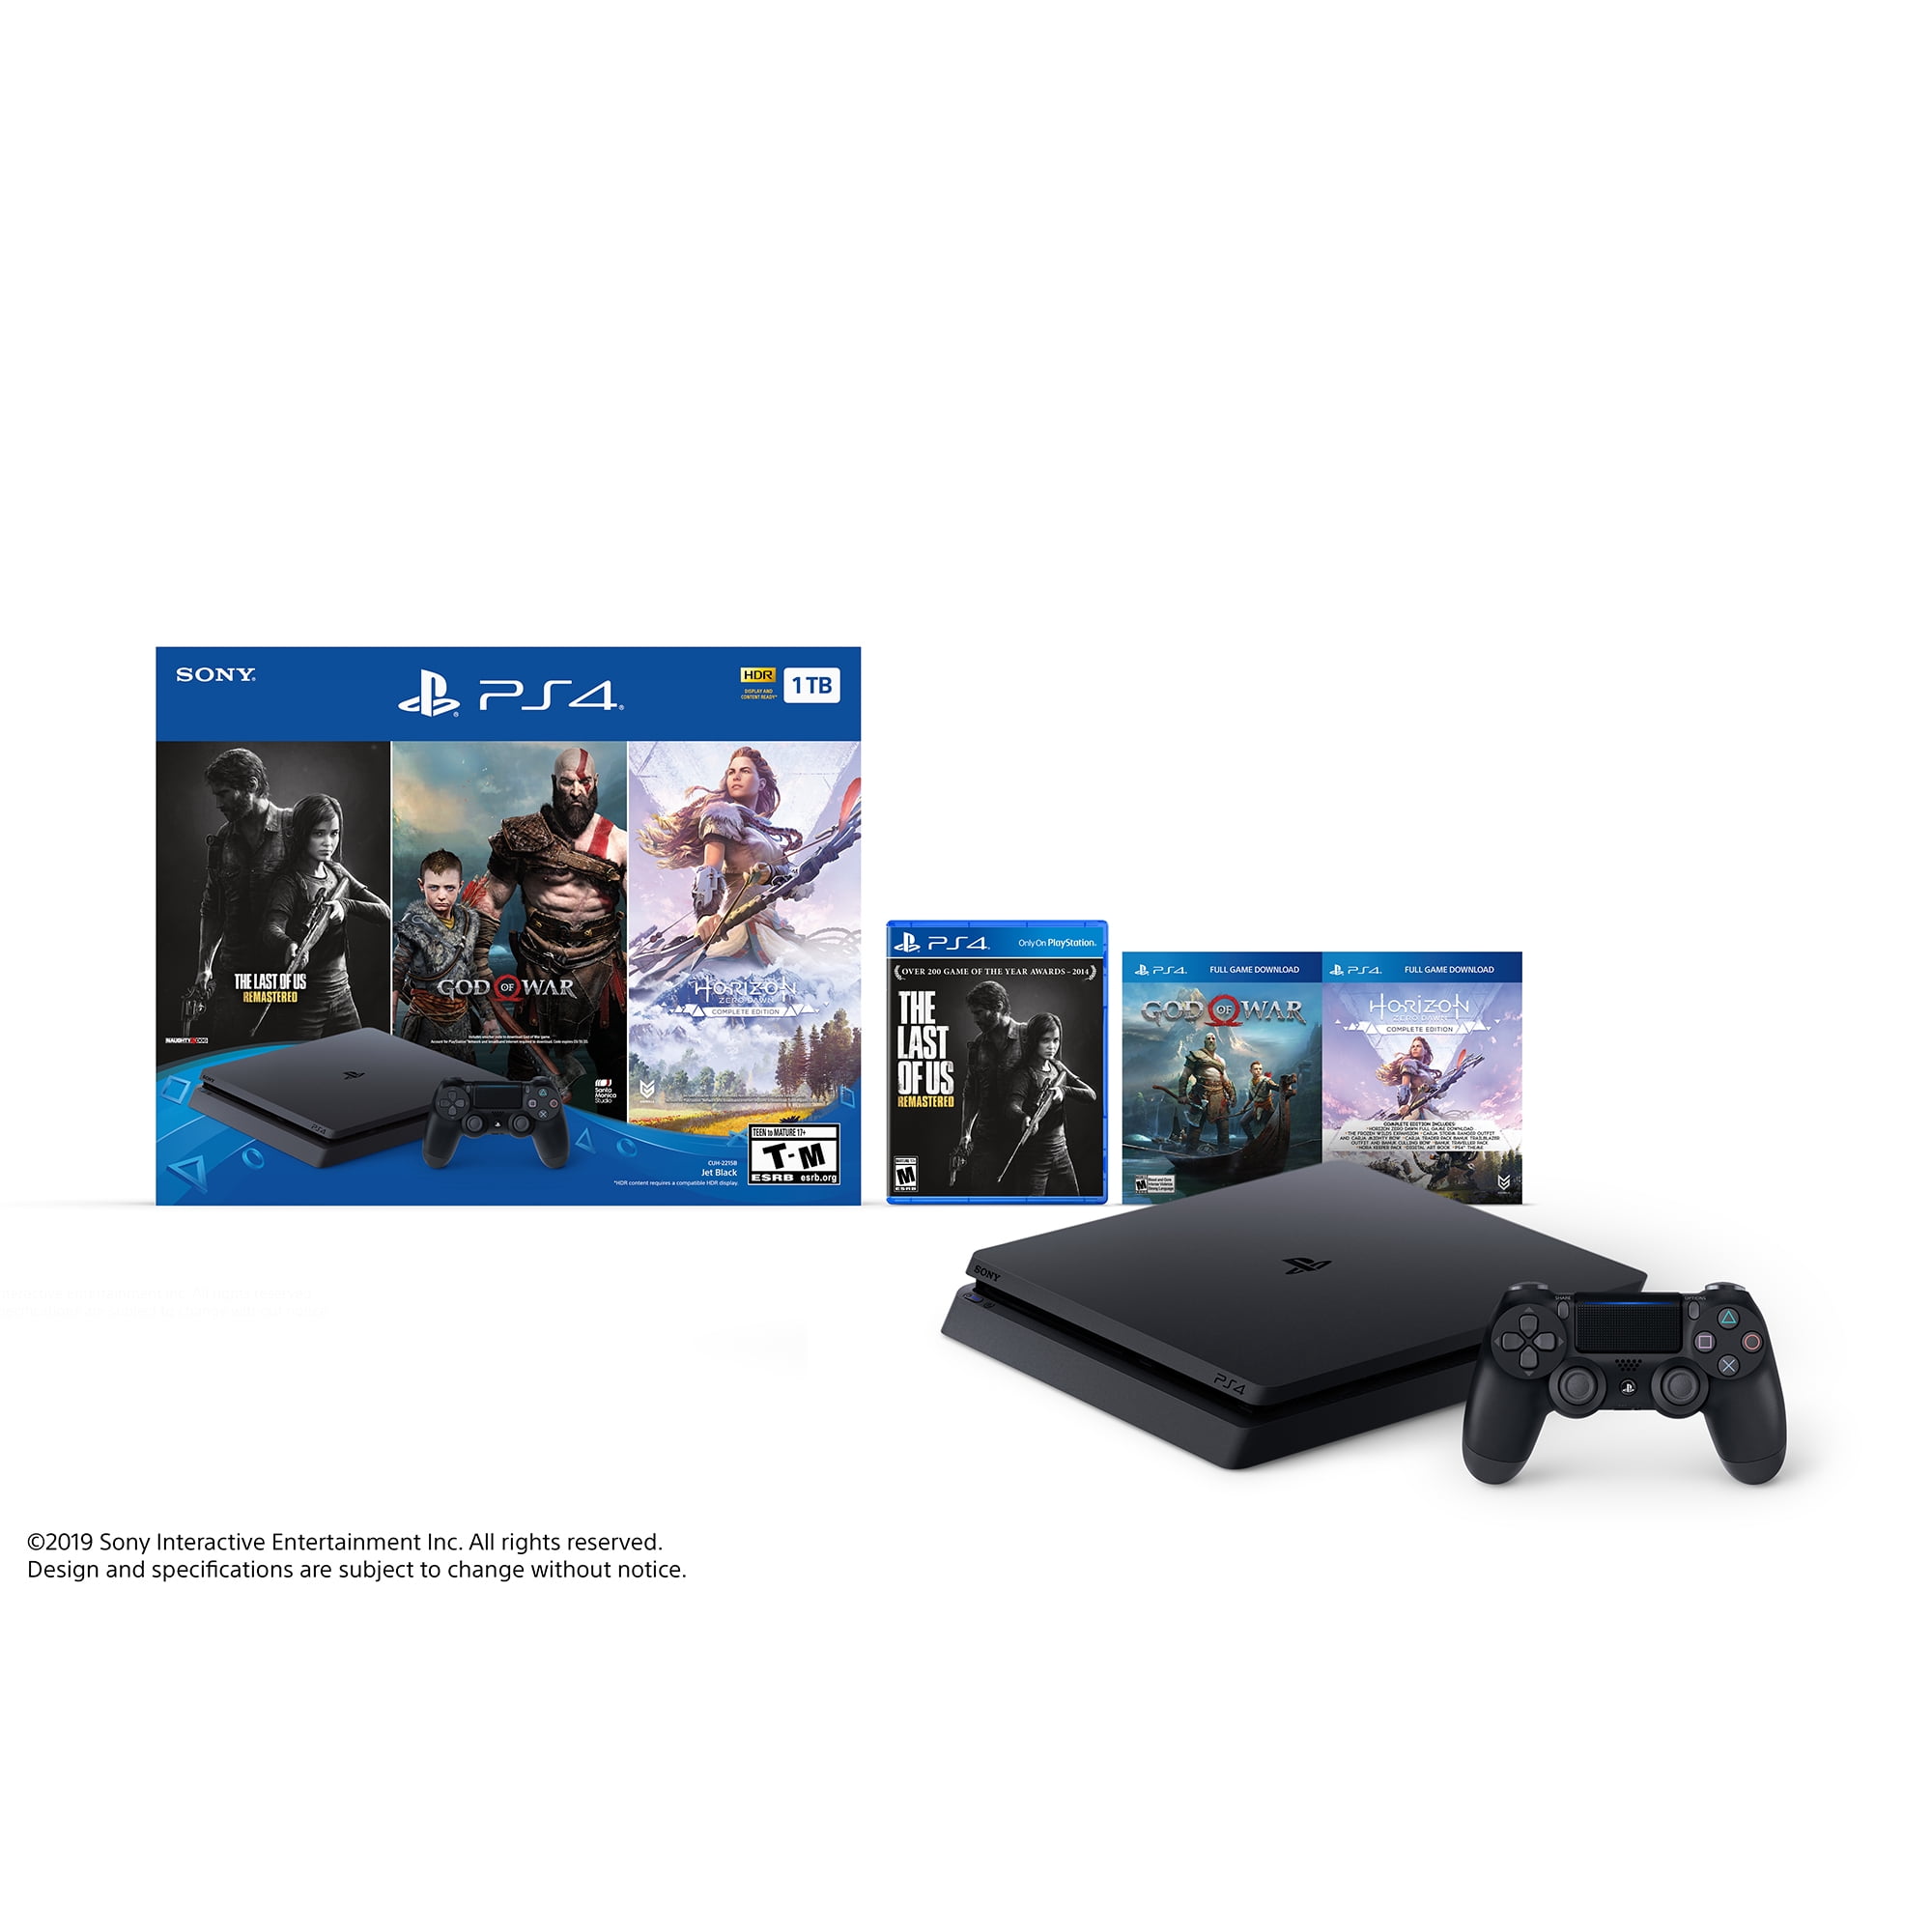 Sony PlayStation 4 Slim 1TB Only On PlayStation - 3 Games Bundle: God of  War, The Last of Us Remastered, and Horizon Zero Dawn: Complete Edition